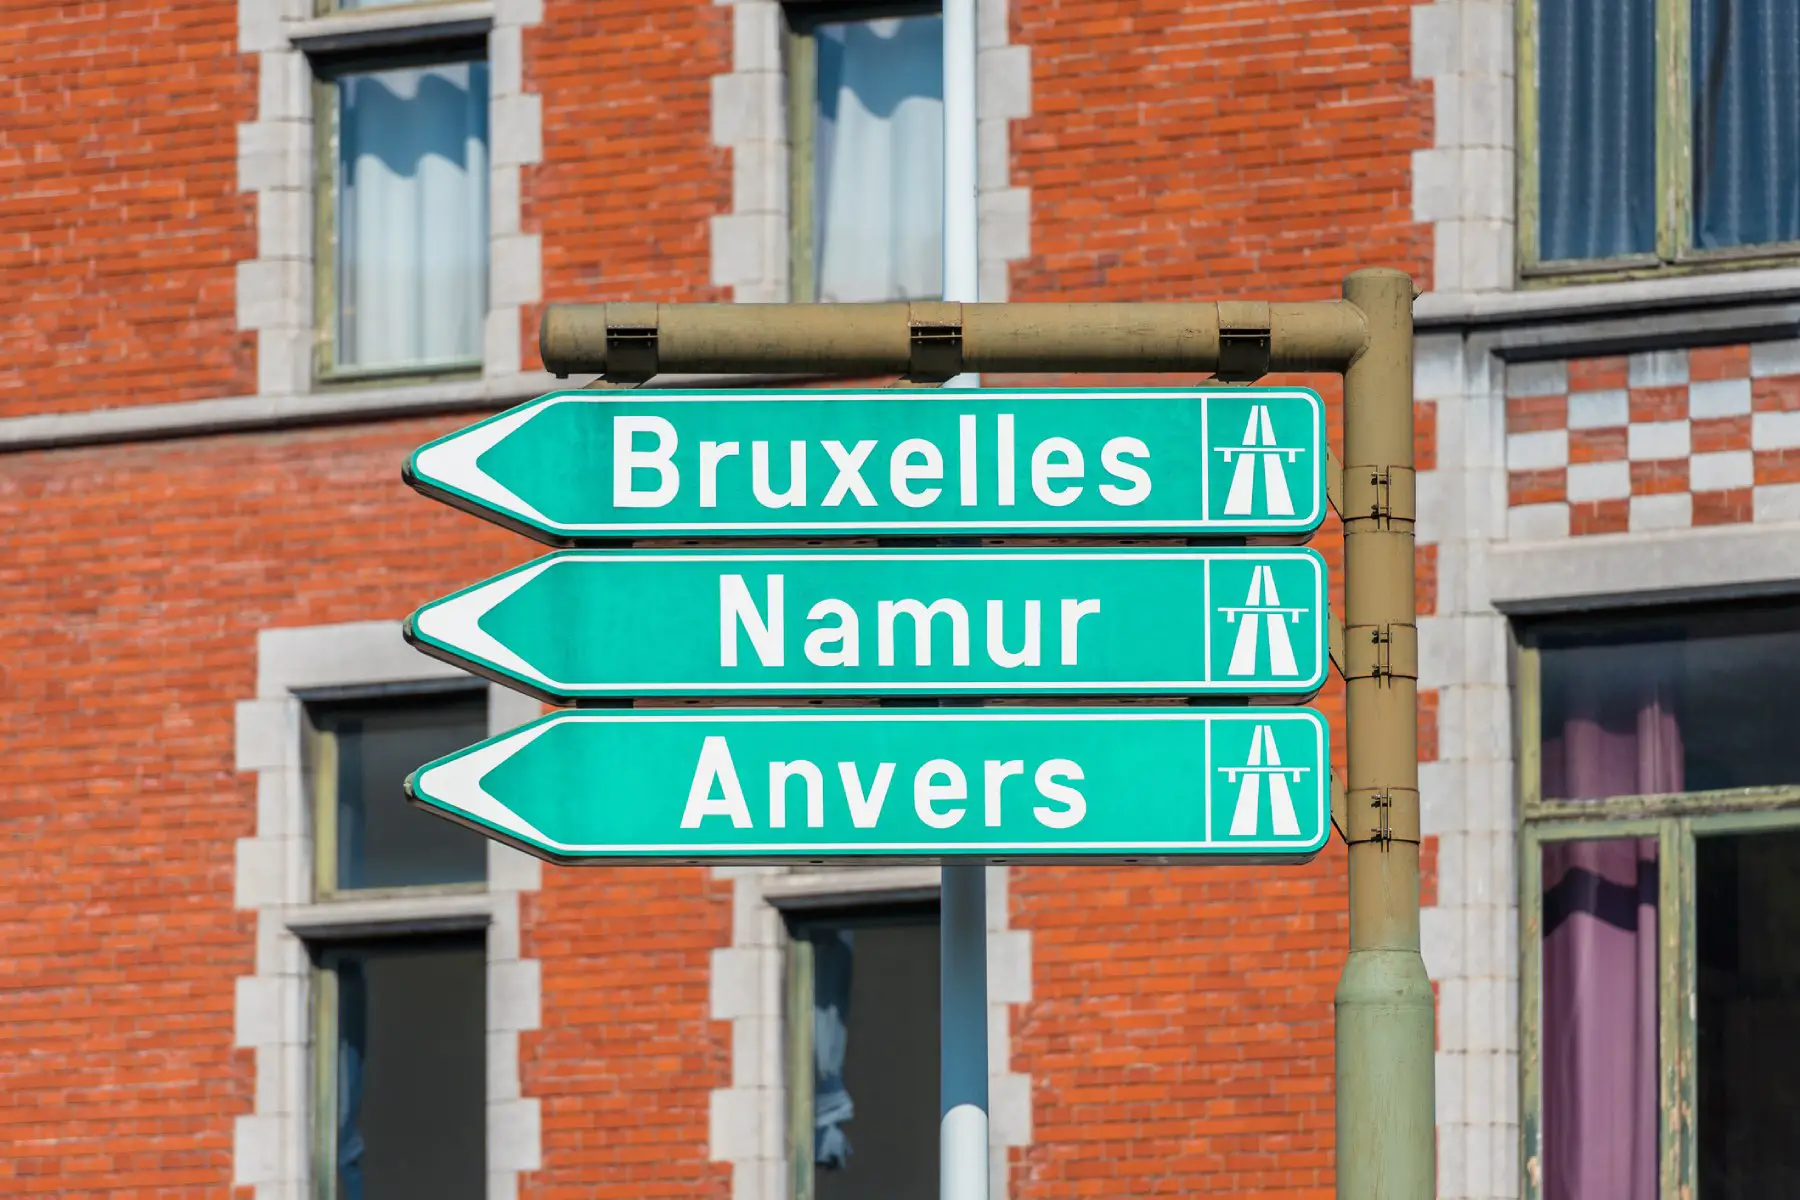 green colored directional signs to Brussels, Namur, and Antwerp in Liège, Belgium